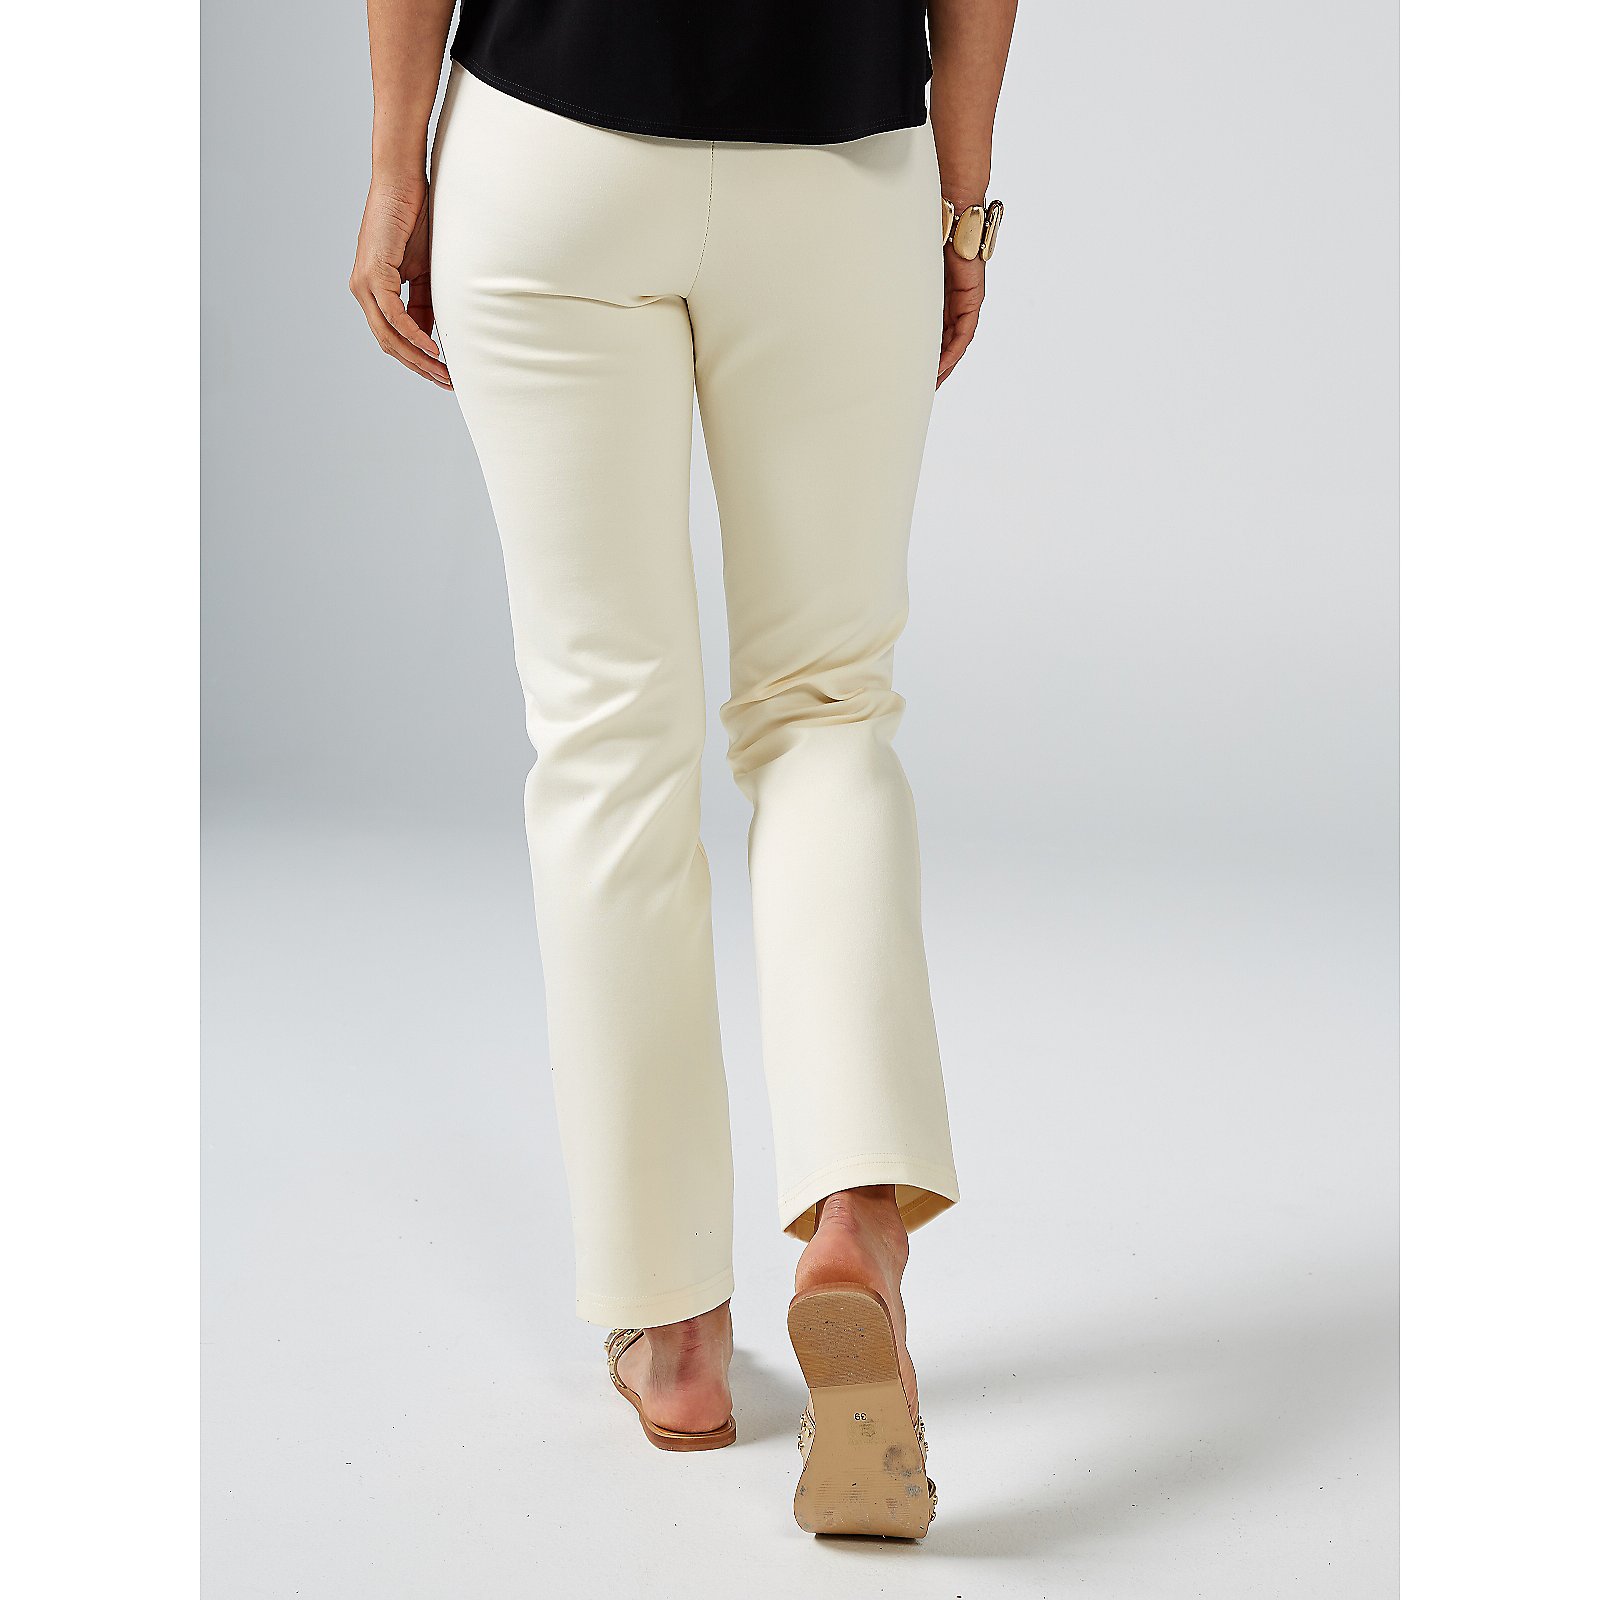 MarlaWynne FLATTERfit Premium Pant Camel Pull On Ankle Length Pants 